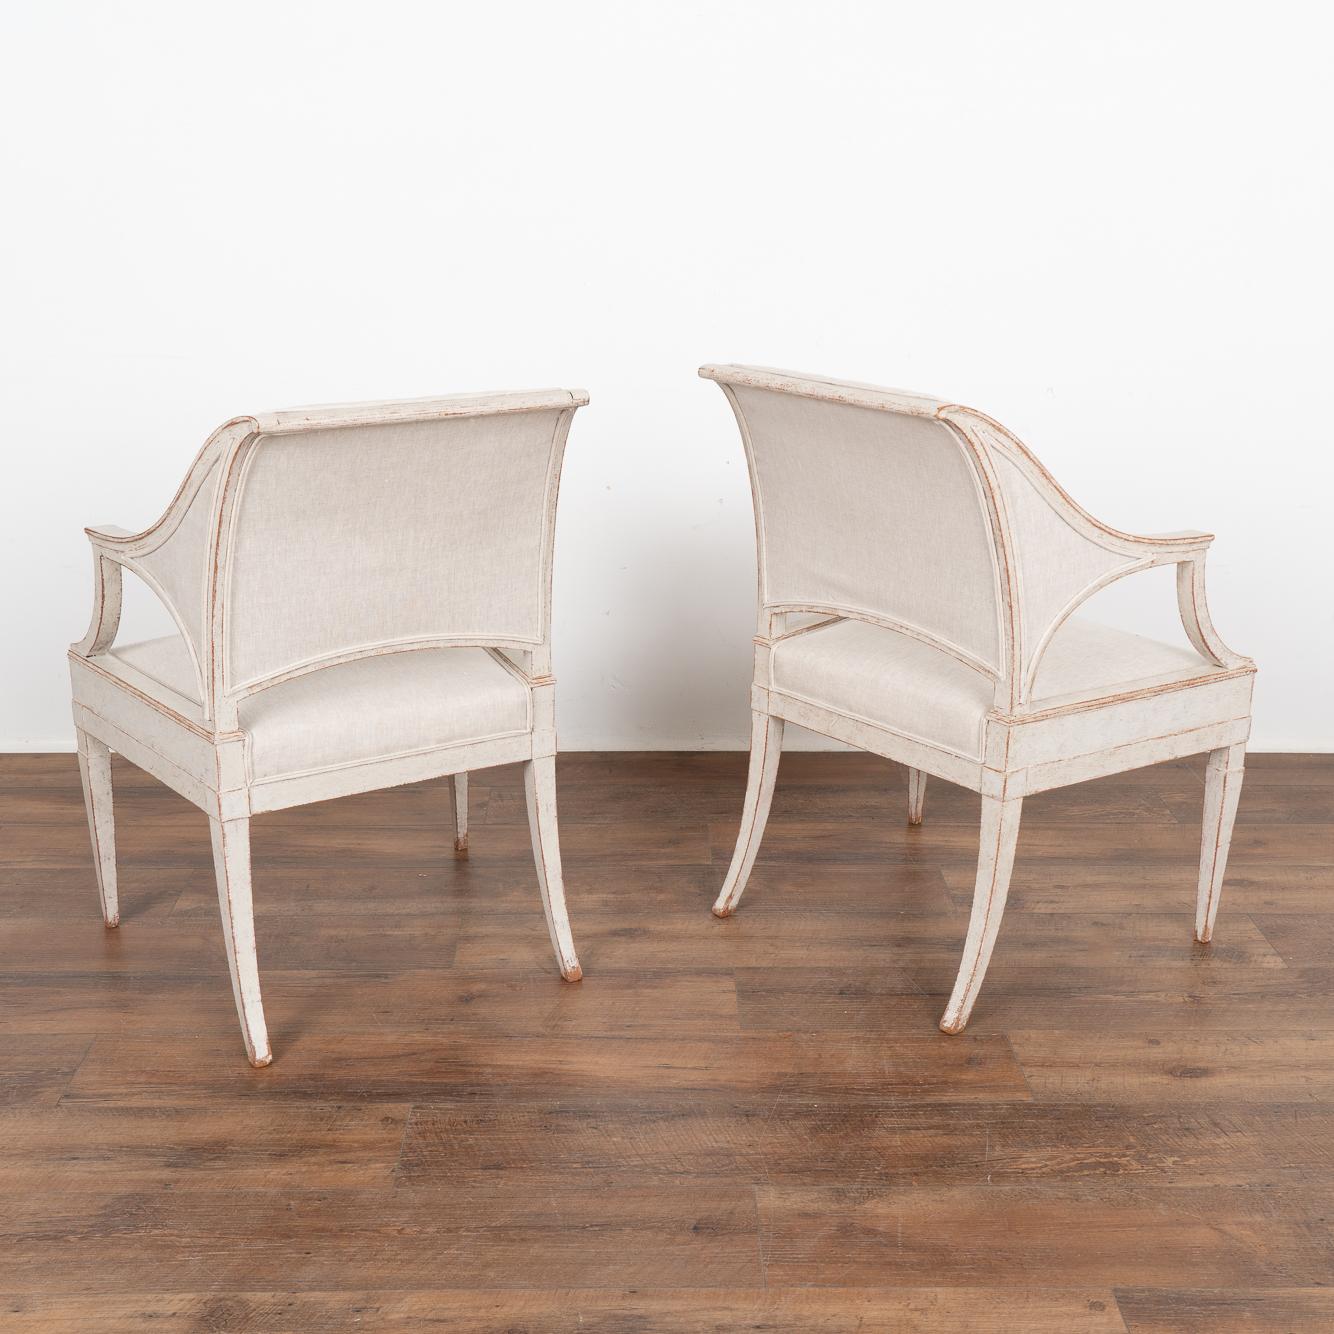 Set of Four Swedish Gustavian White Painted Arm Chairs, circa 1820-40 8